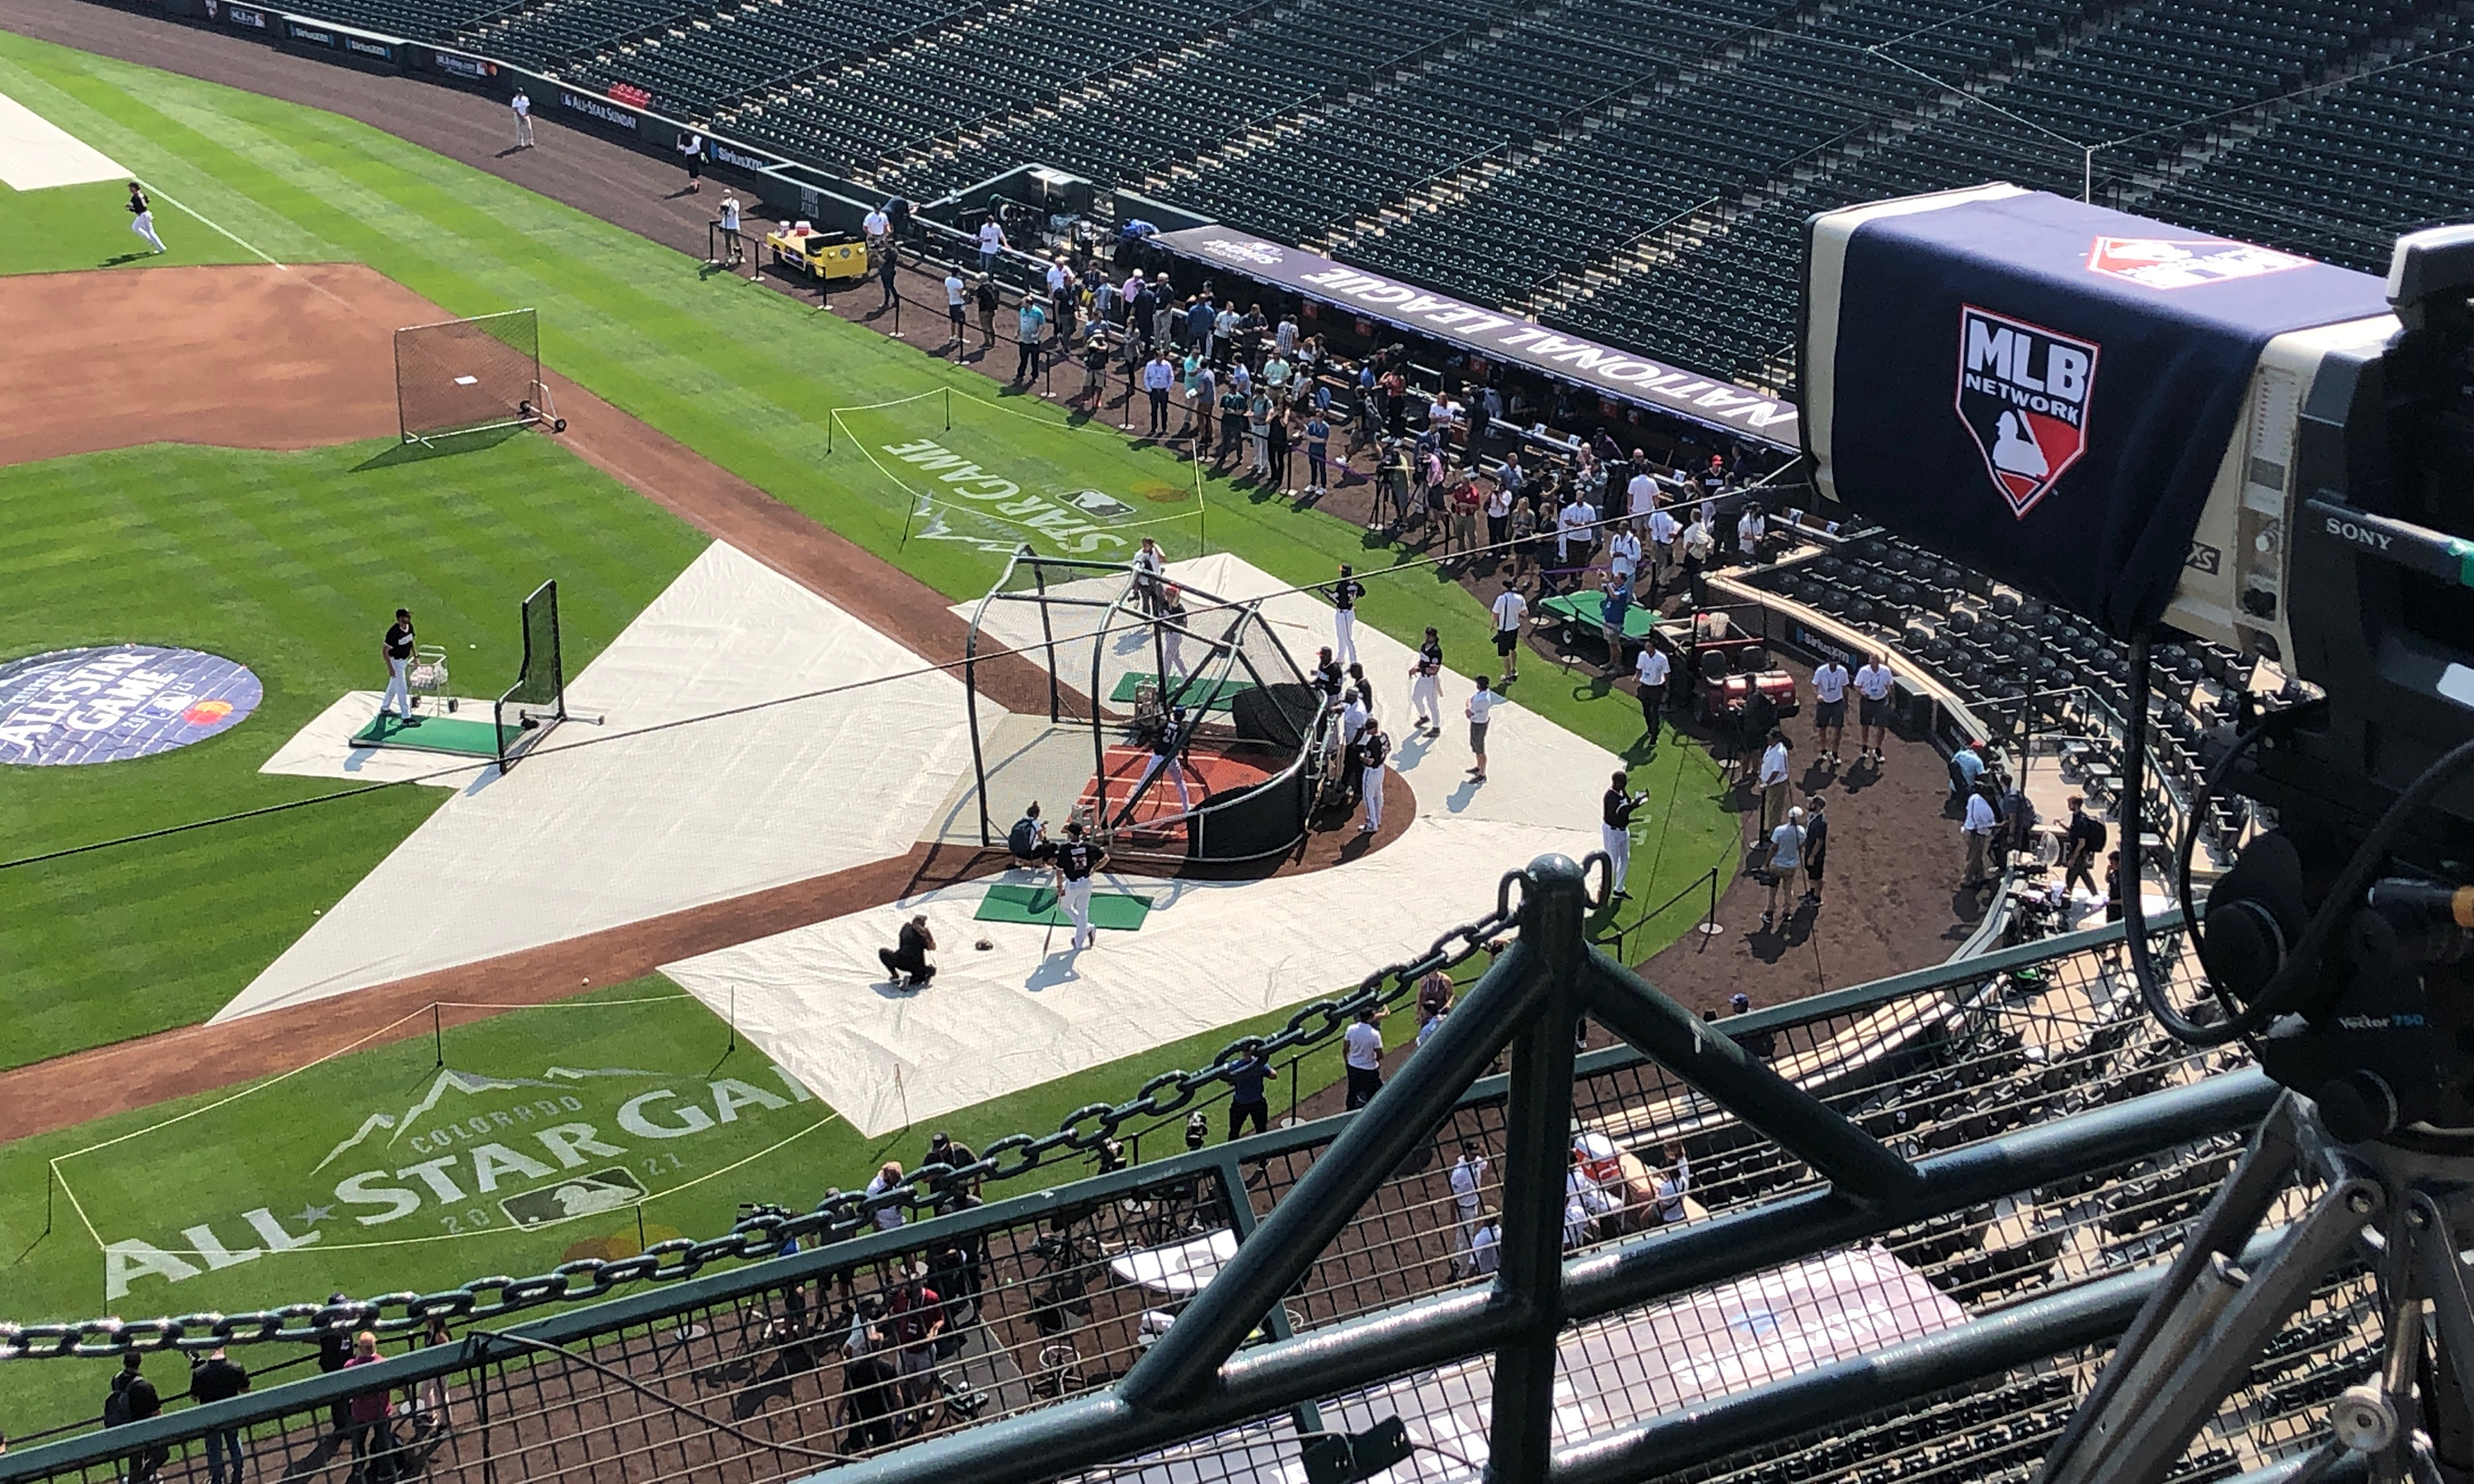 Live From MLB All-Star 2021 MLB Network Covers Pregame Festivities, Player Personalities on Purple Carpet at McGregor Square